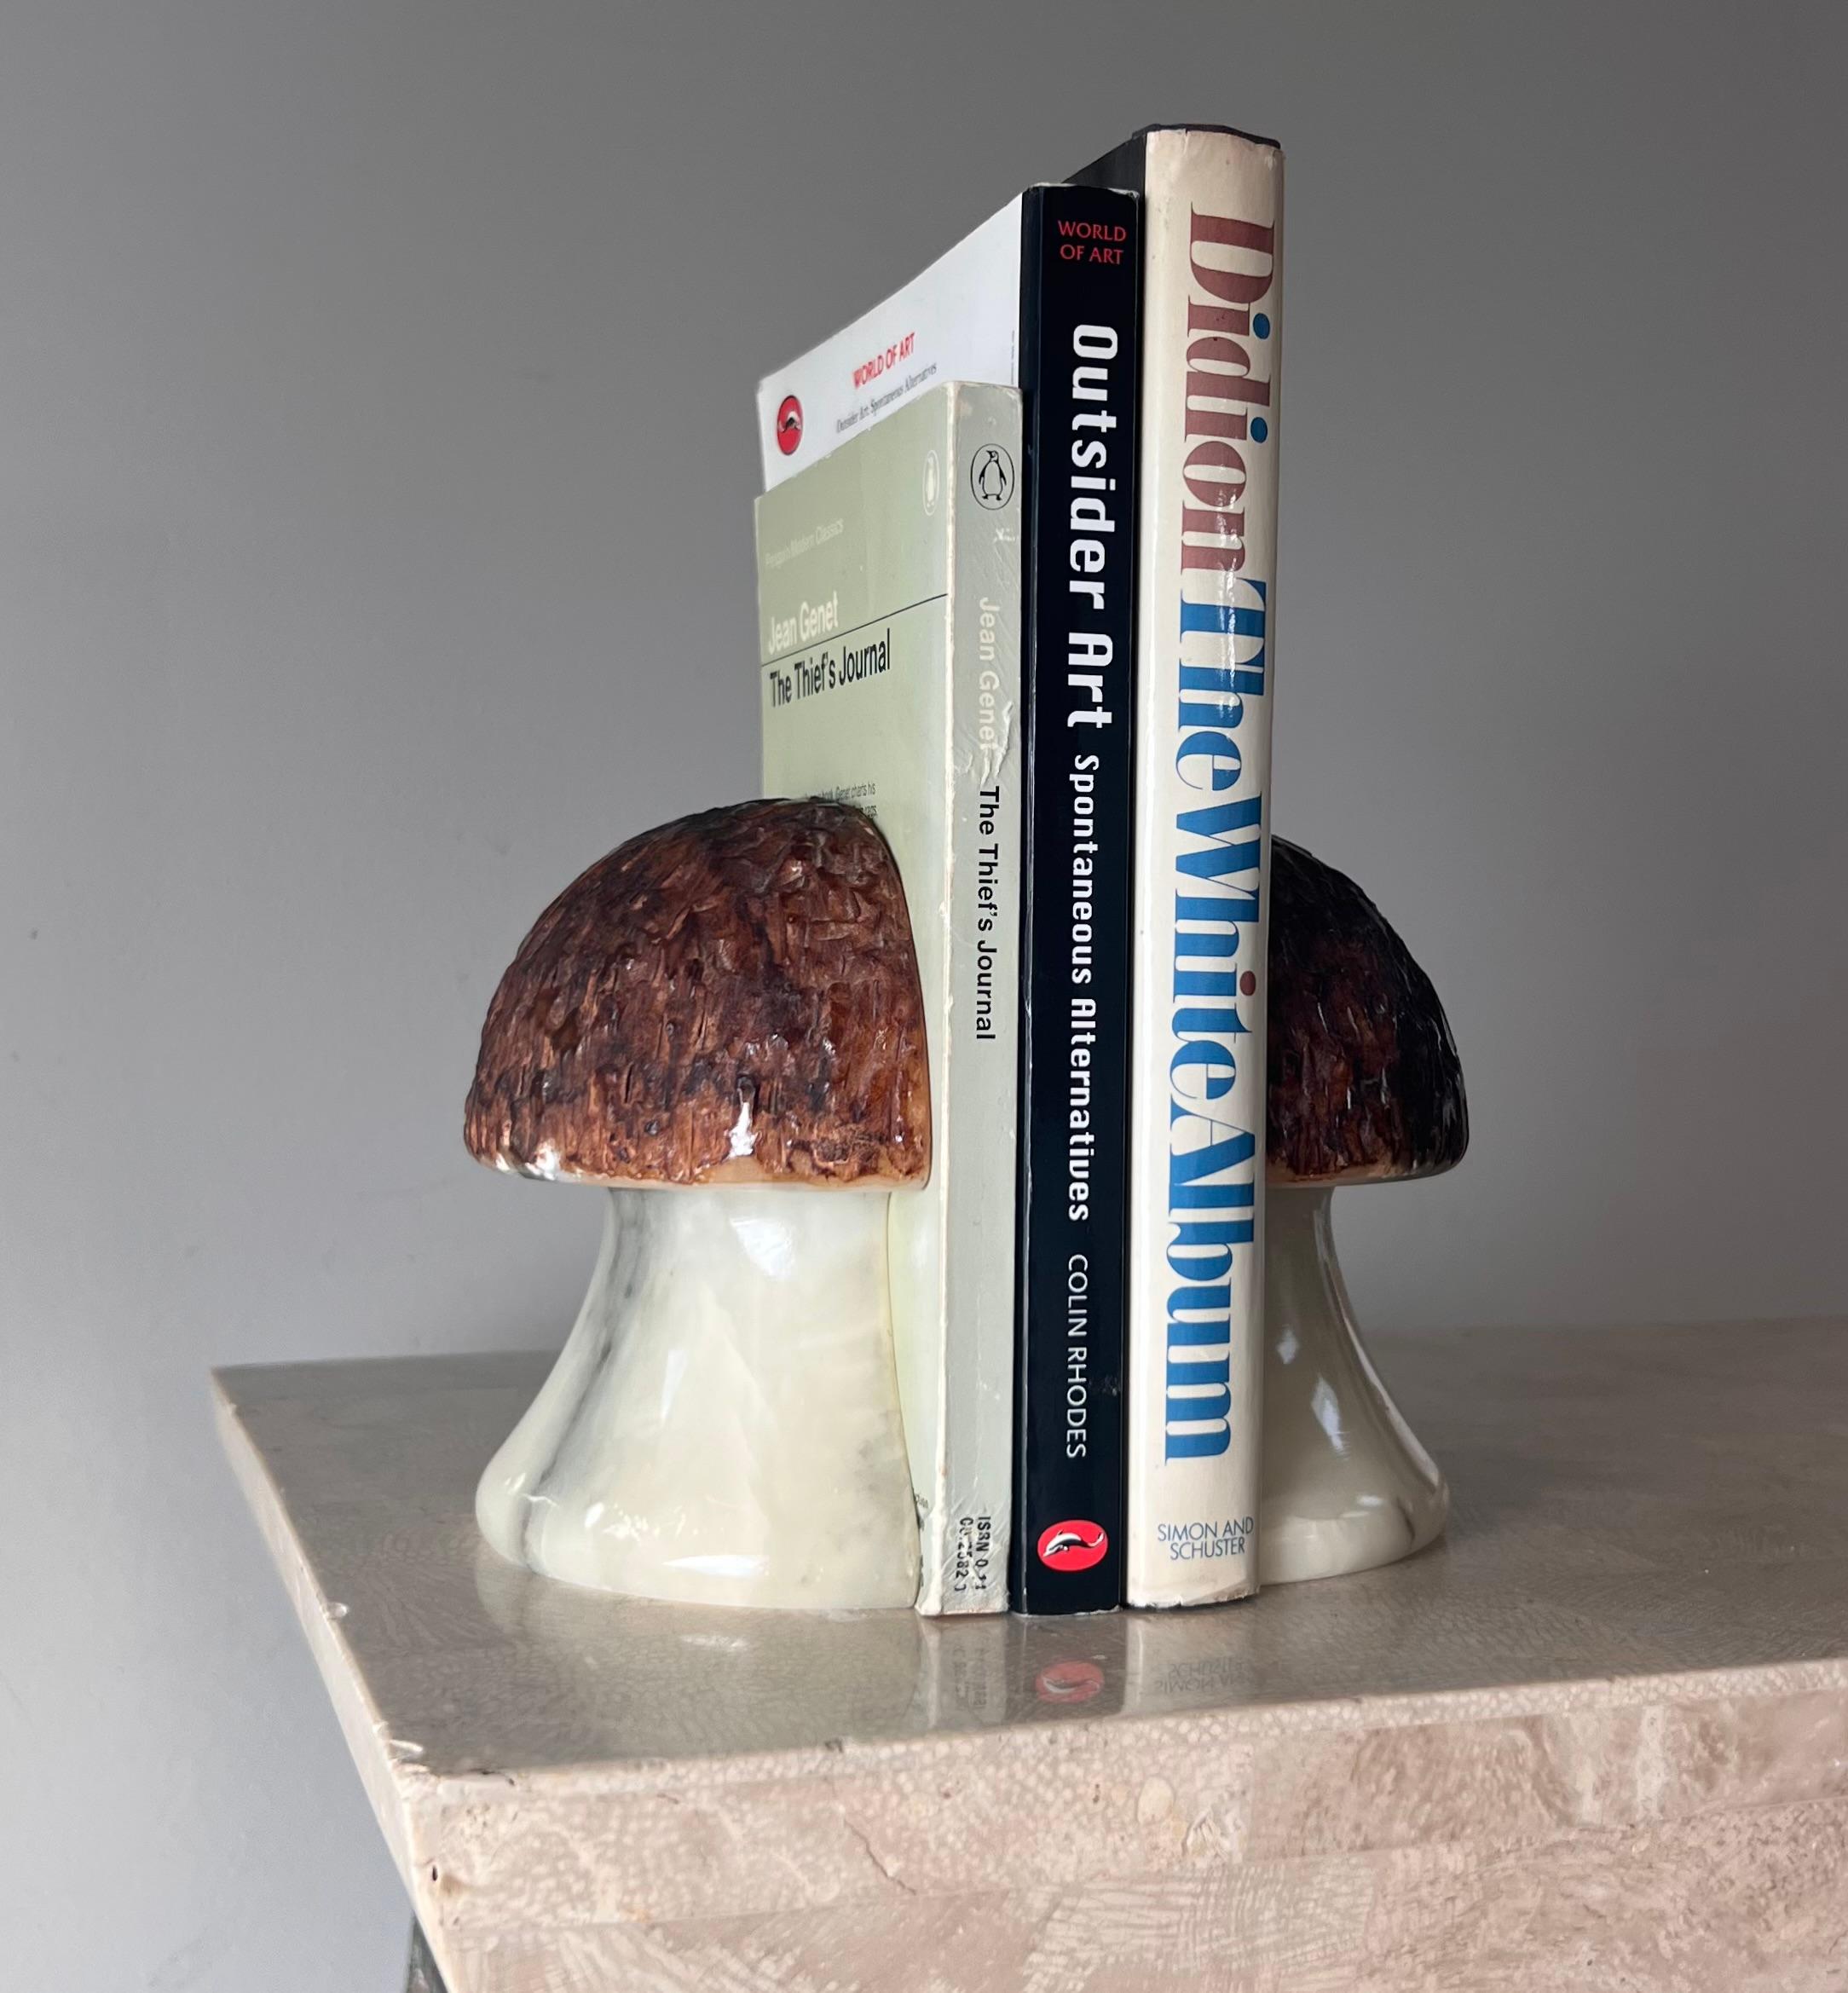 A pair of marble and alabaster mushroom bookends, hand-carved in Italy 1960s. Bases are eggshell with charcoal veining, while the caps are chestnut hued and textured. Some losses; please refer to photos. 
As a unit: 4.75” W x 4.5” D x 5” H